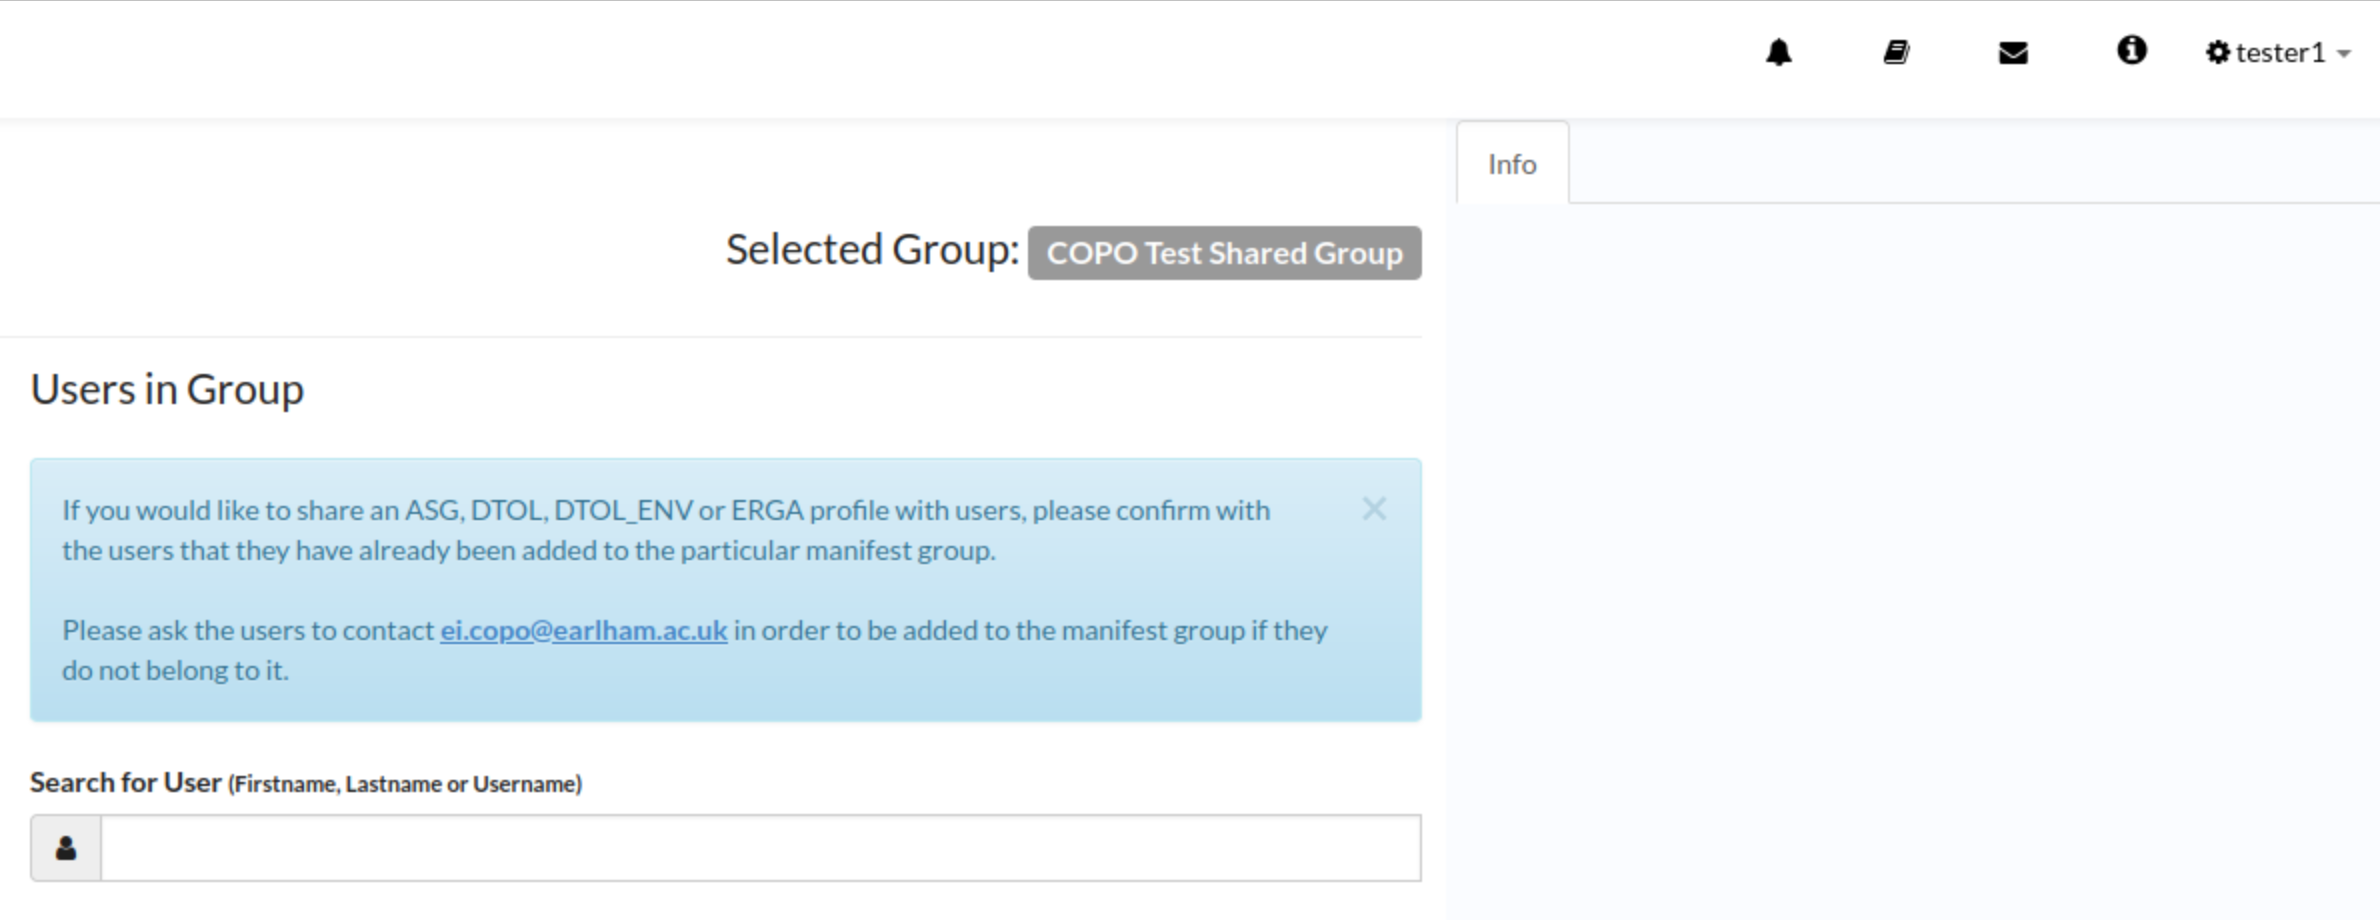 'Users in Group' search box